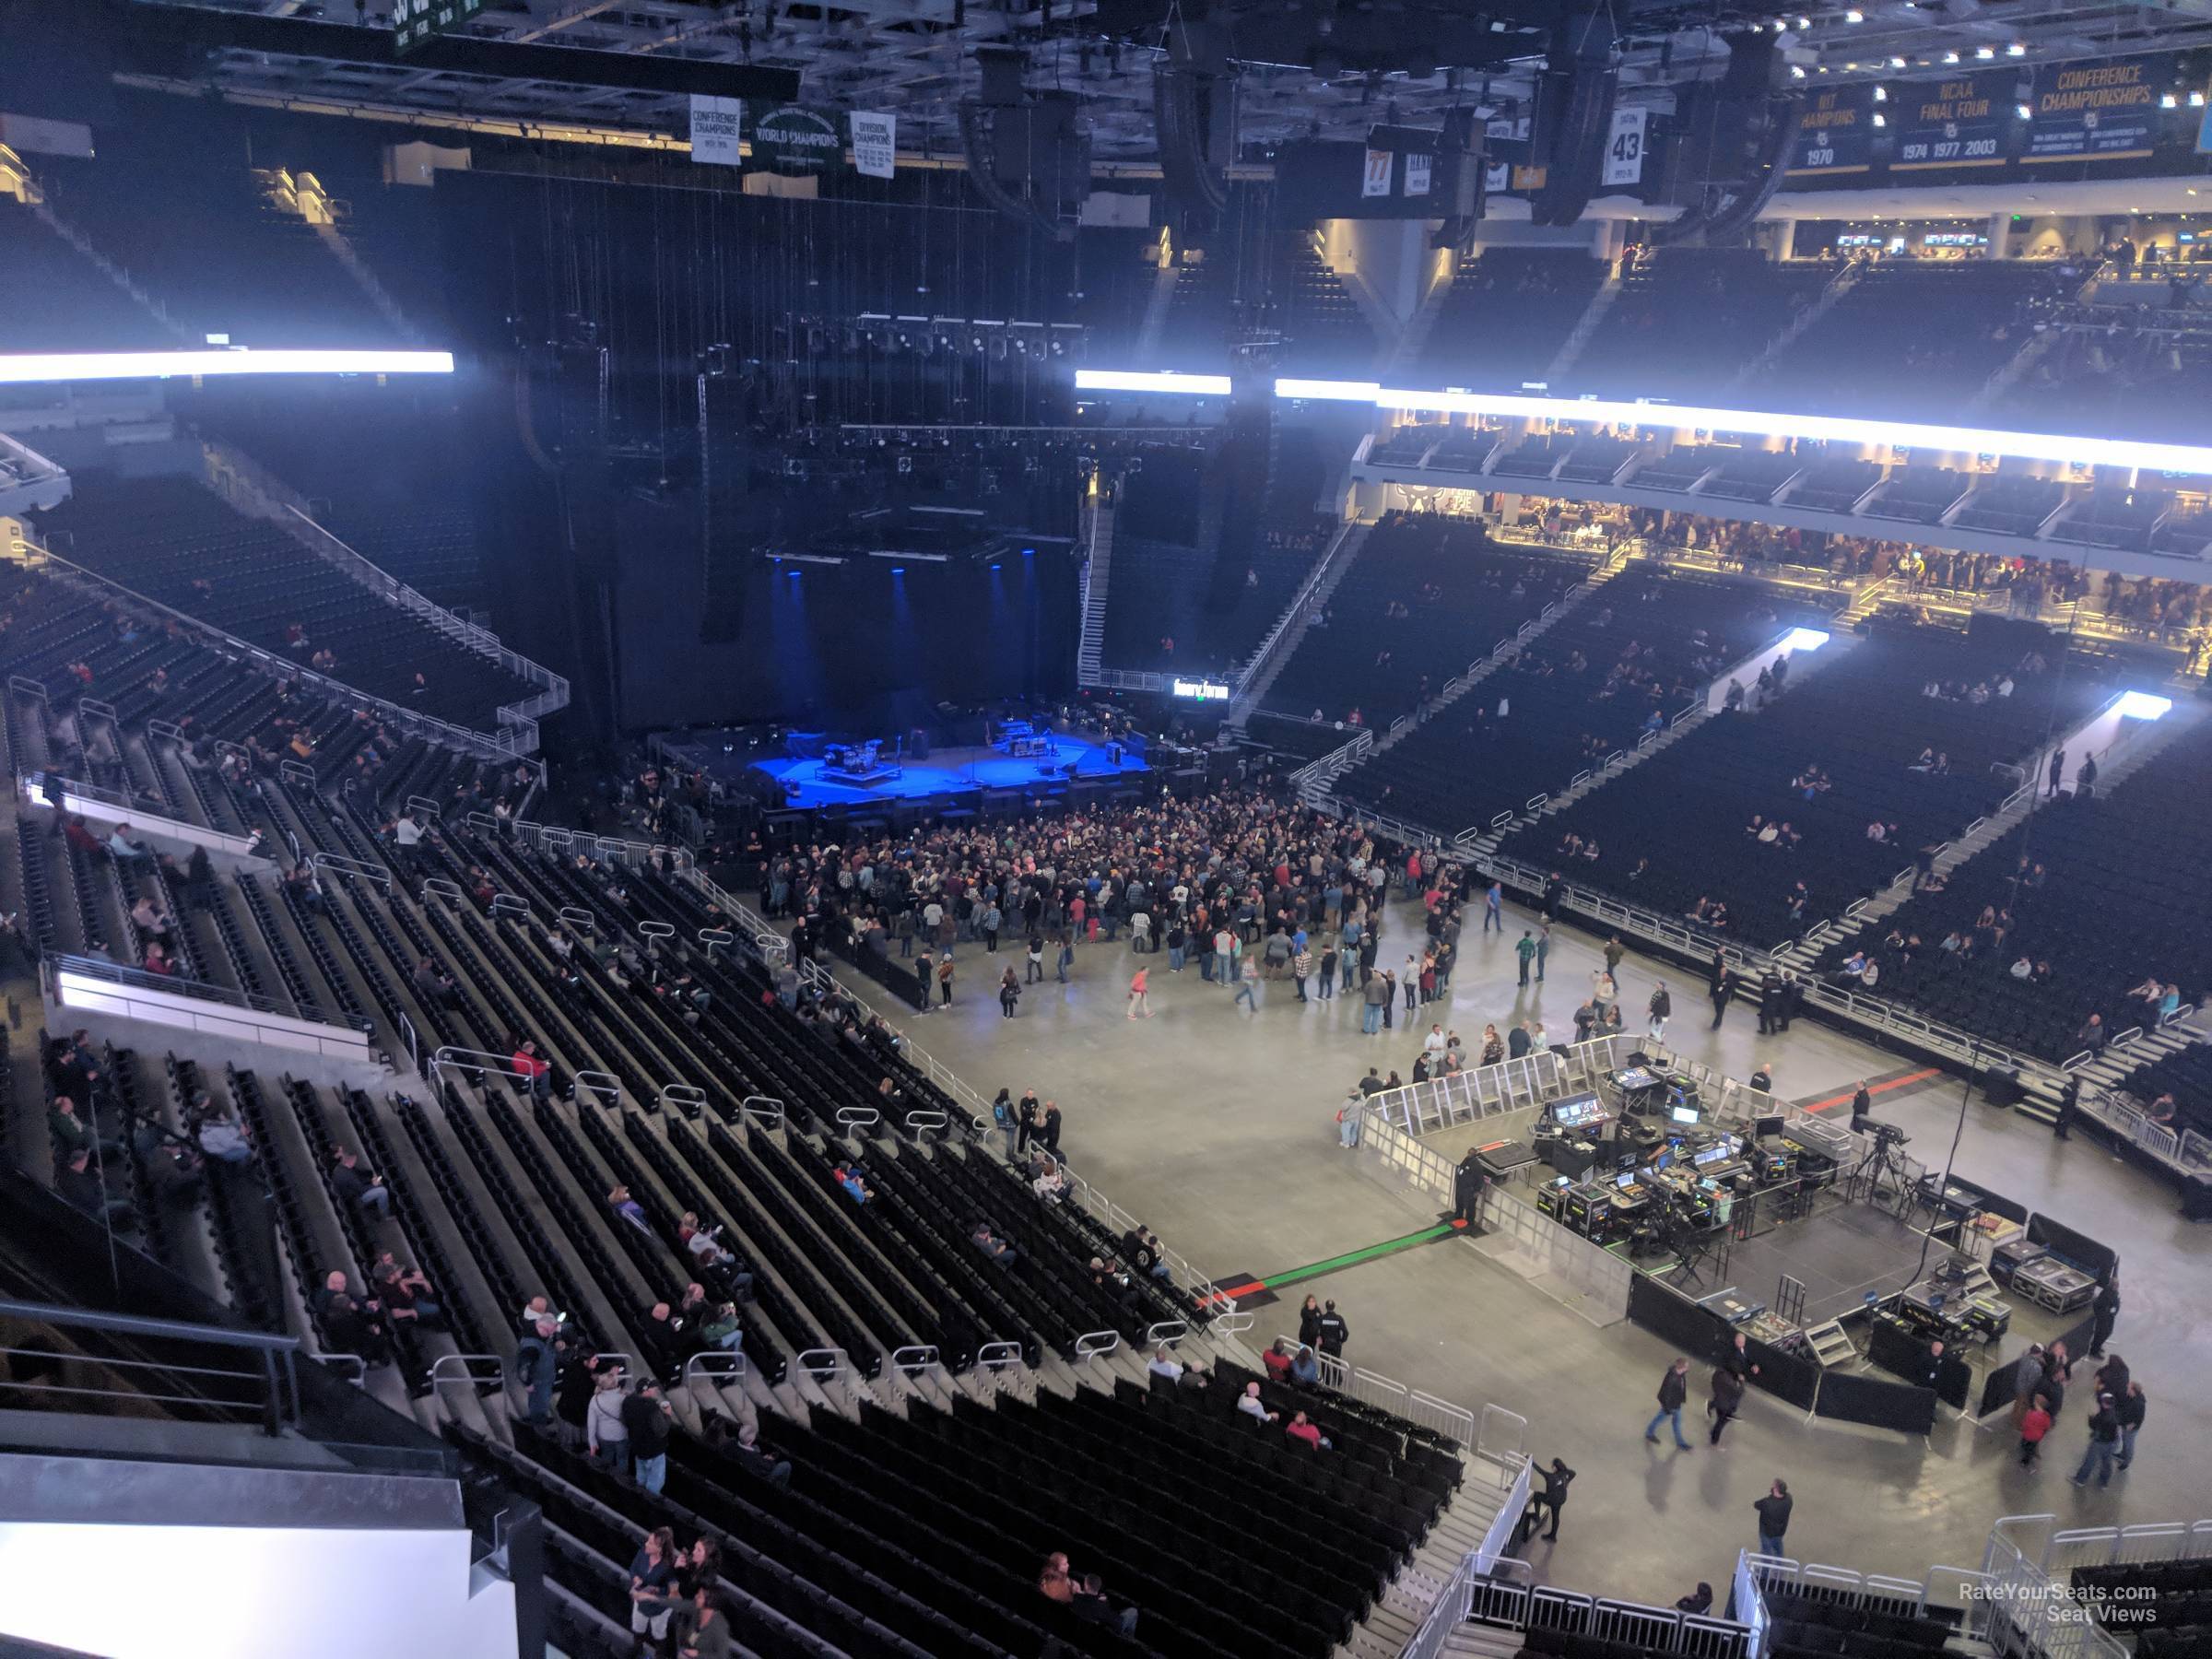 section 204, row 3 seat view  for concert - fiserv forum